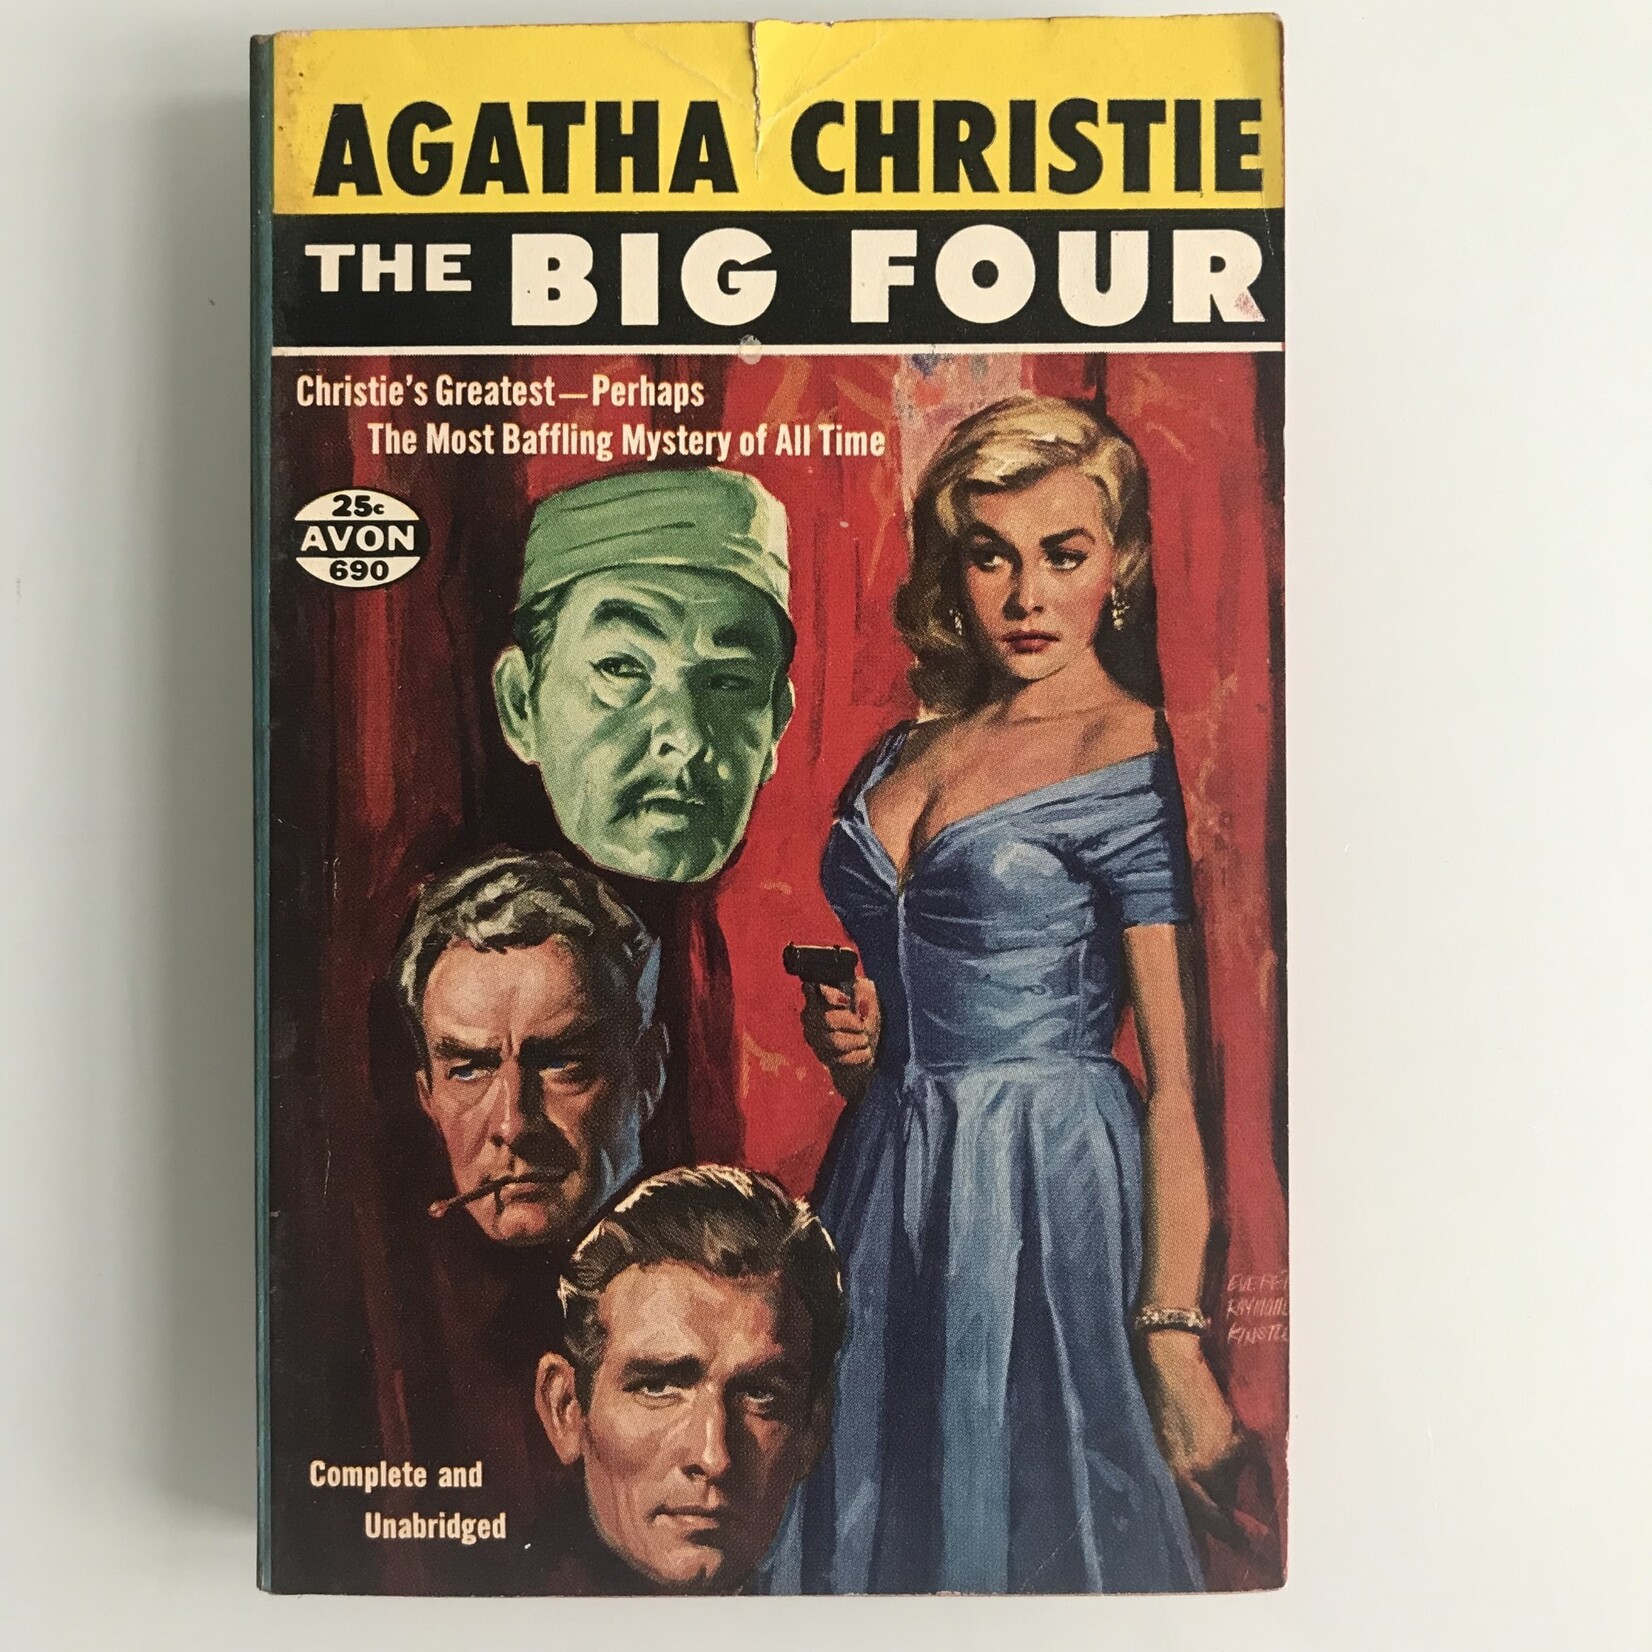 Agatha Christie - The Big Four (Avon Pulp Edition) - Paperback (USED - G)